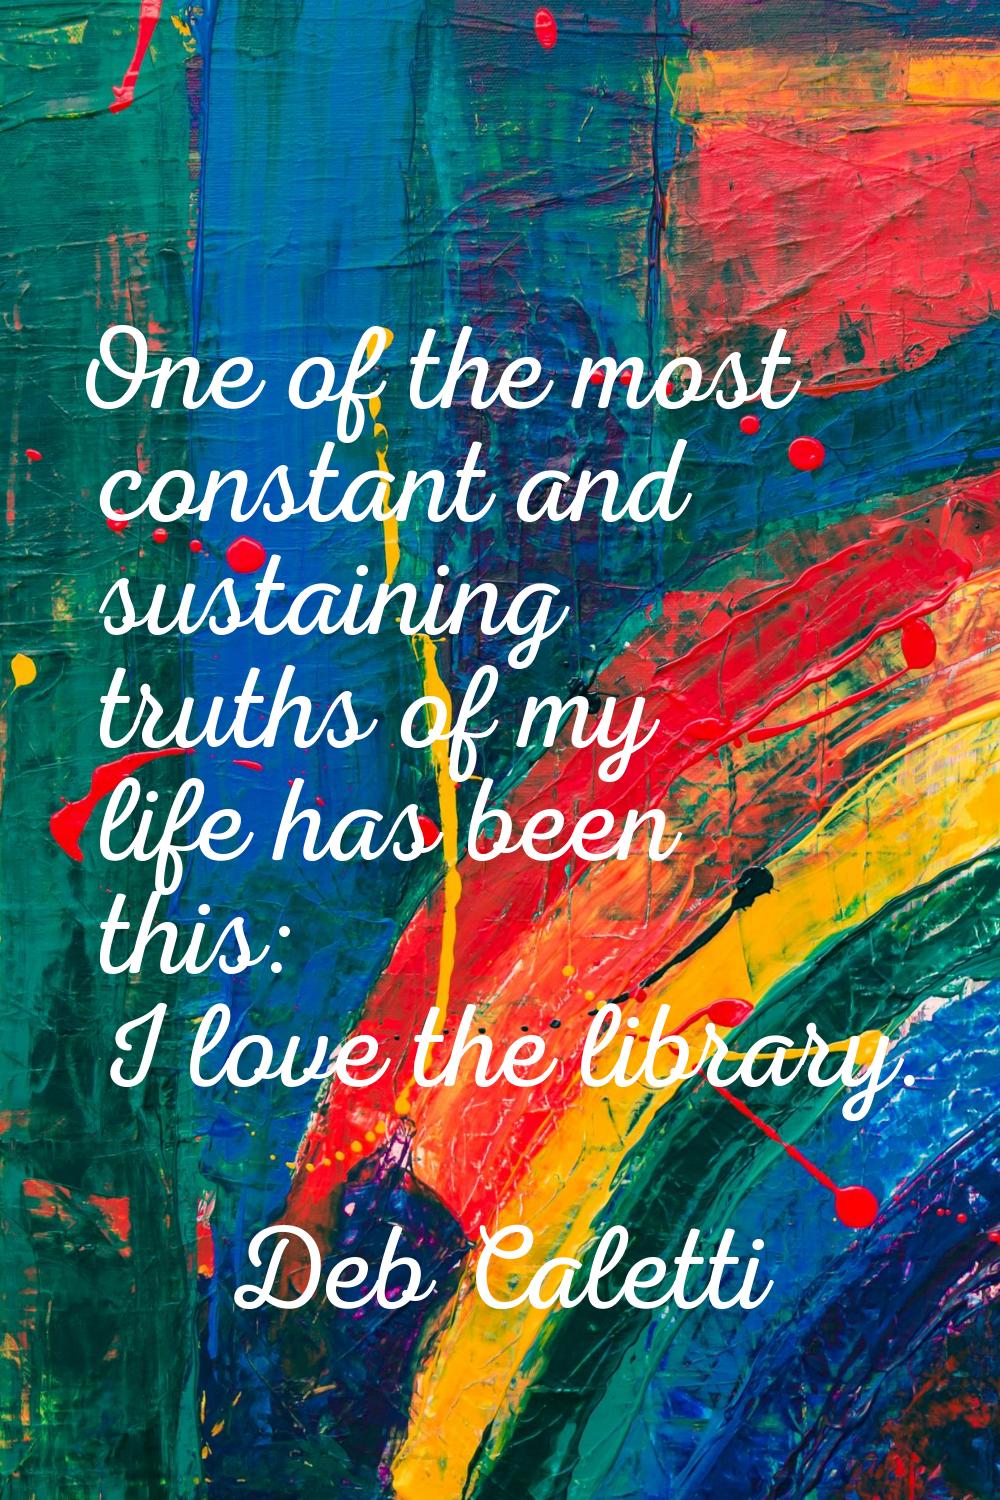 One of the most constant and sustaining truths of my life has been this: I love the library.